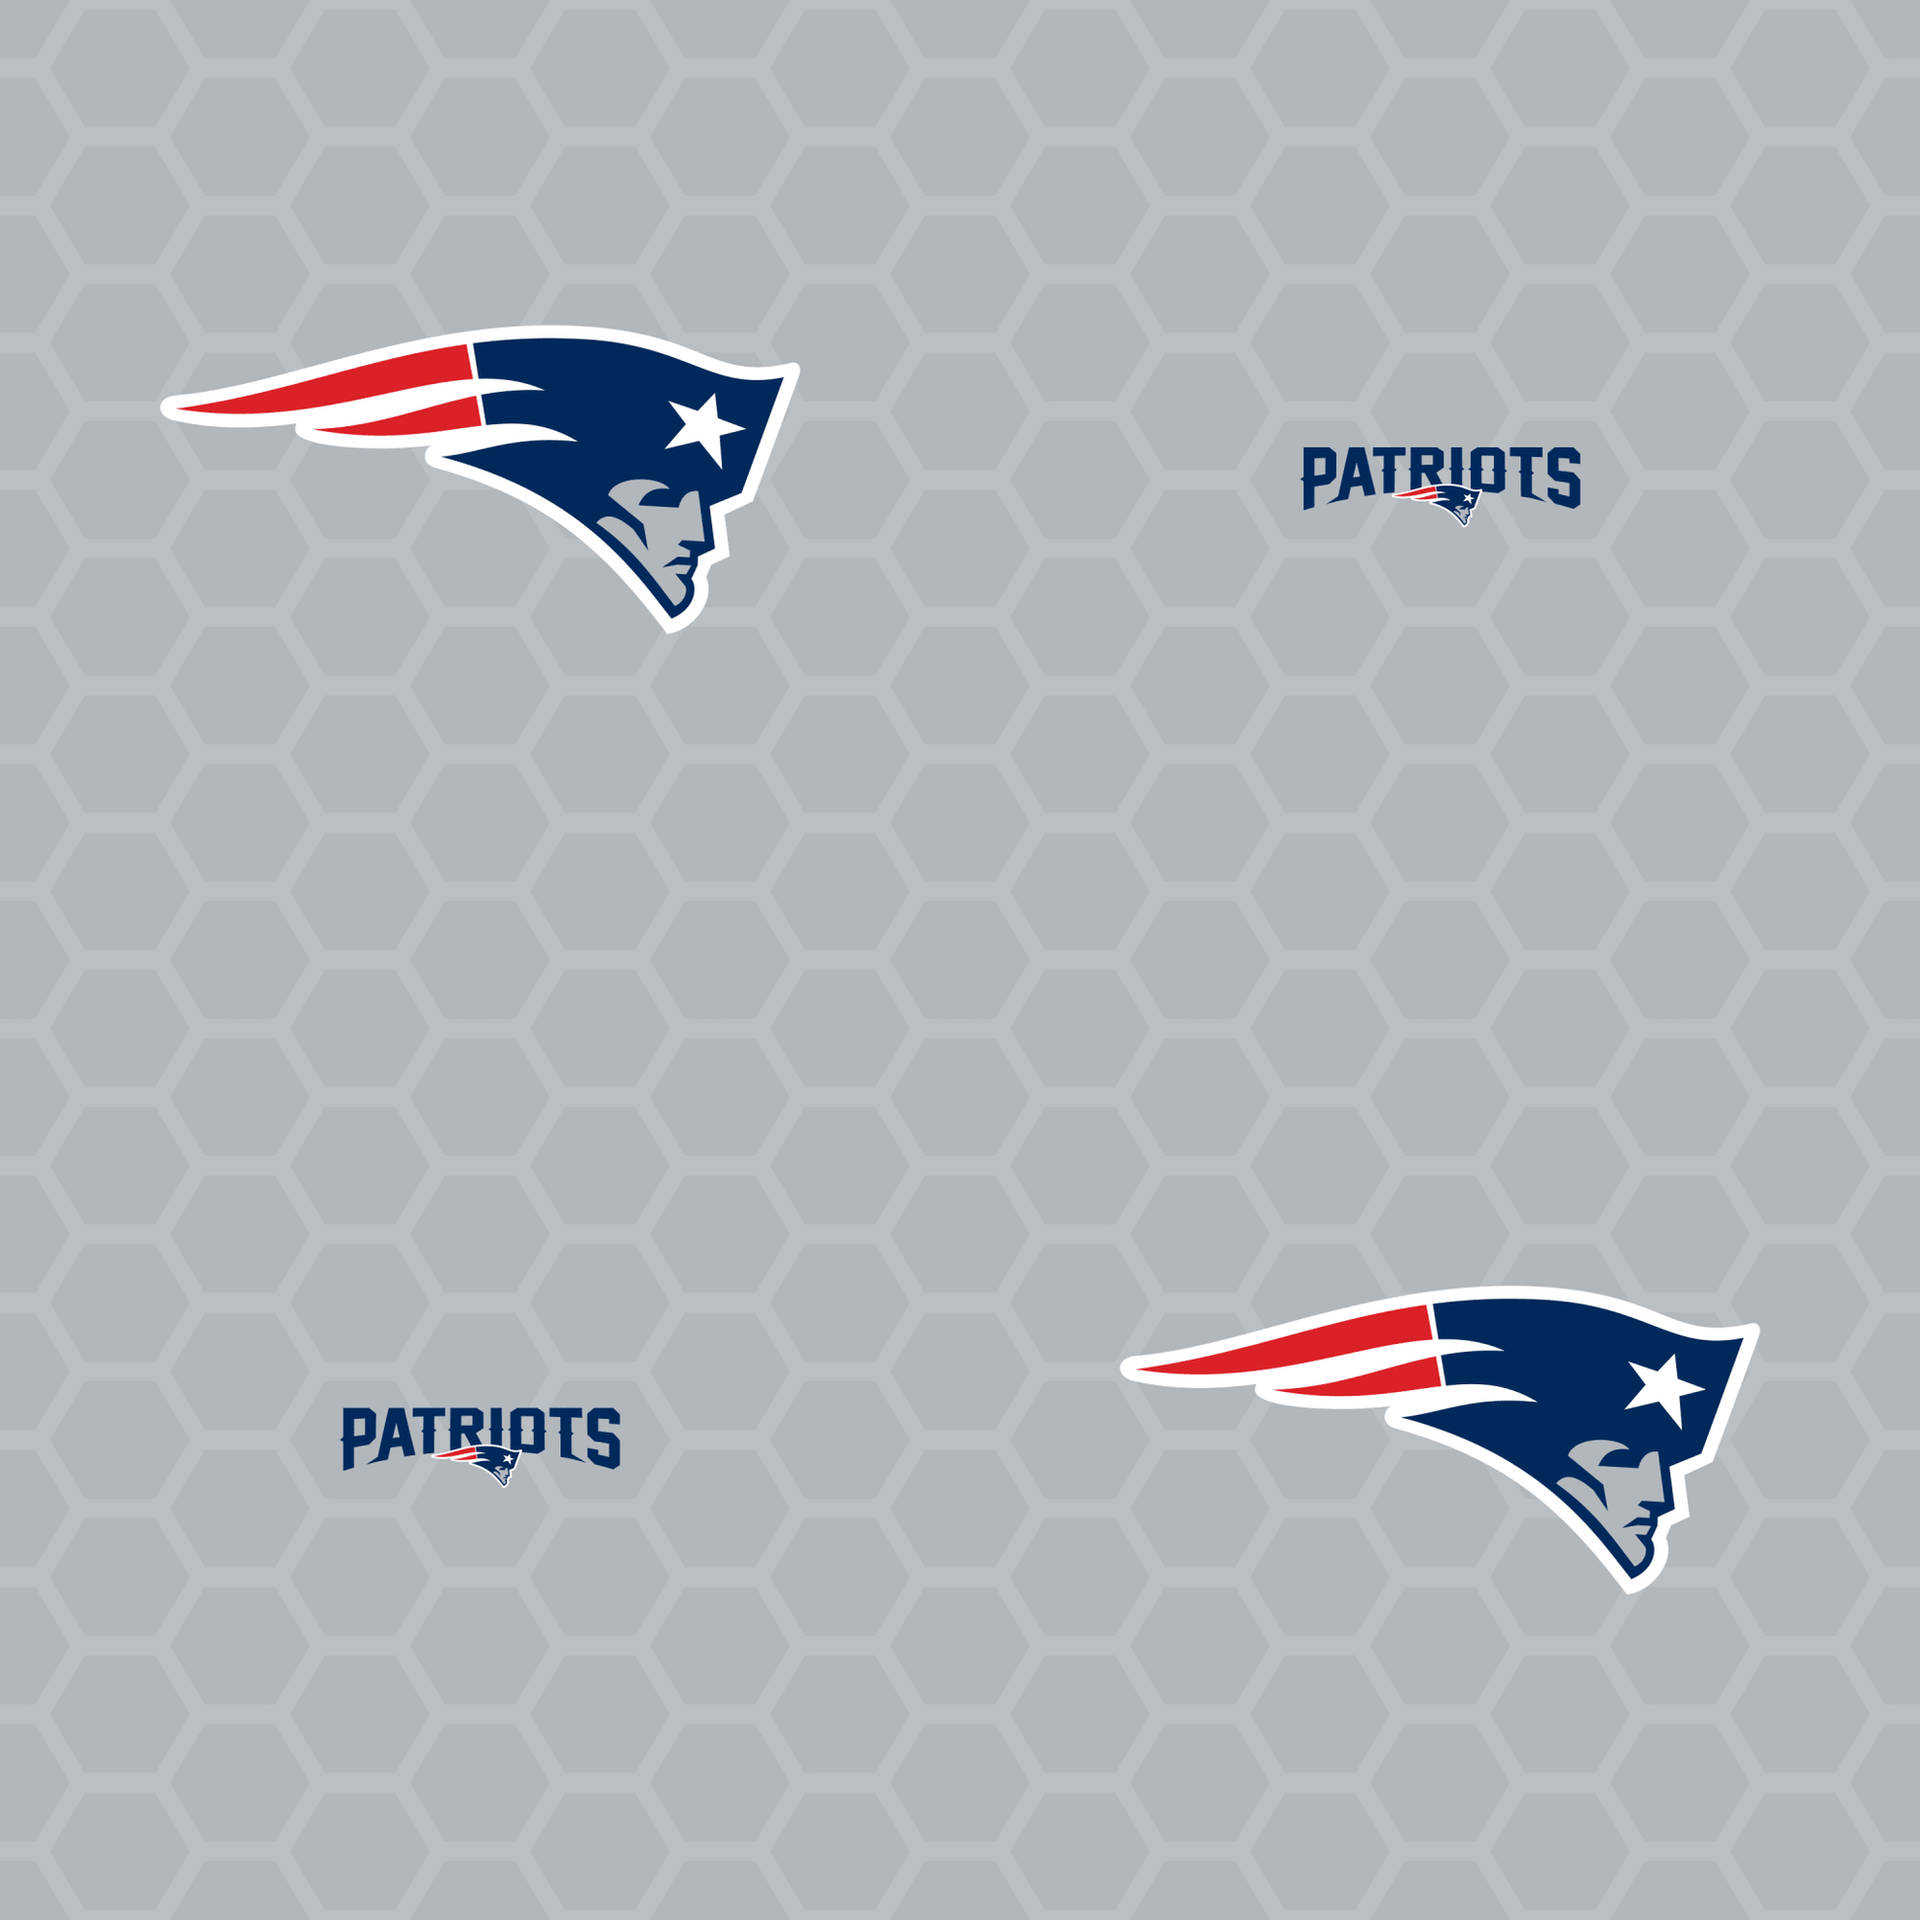 Show your support for the Awesome Patriots with this iconic image! Wallpaper